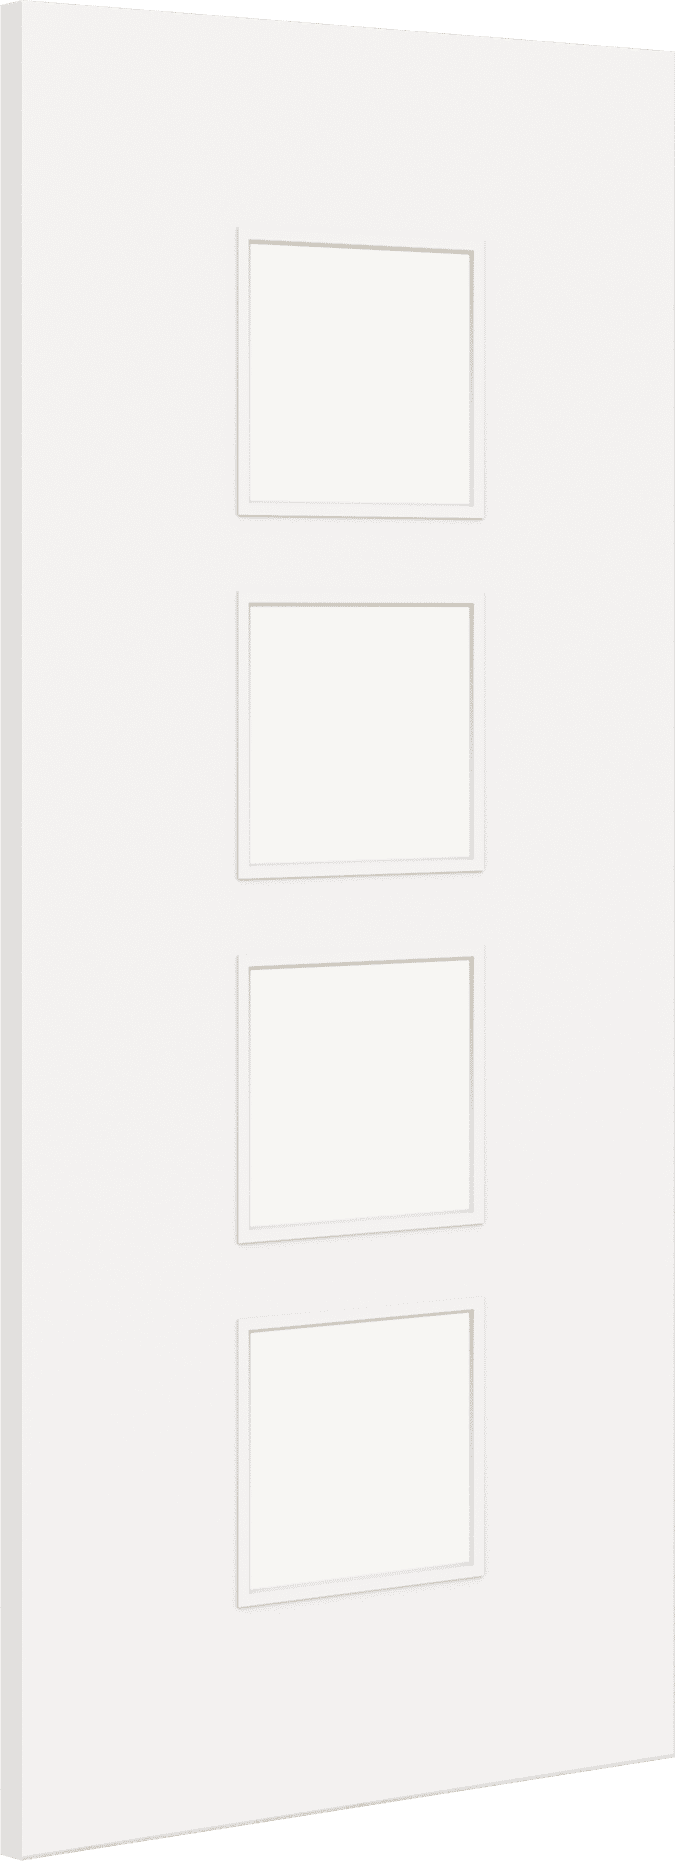 1981mm x 914mm x 44mm (36") Architectural Paint Grade White 09 Clear Glazed Fire Door Blank